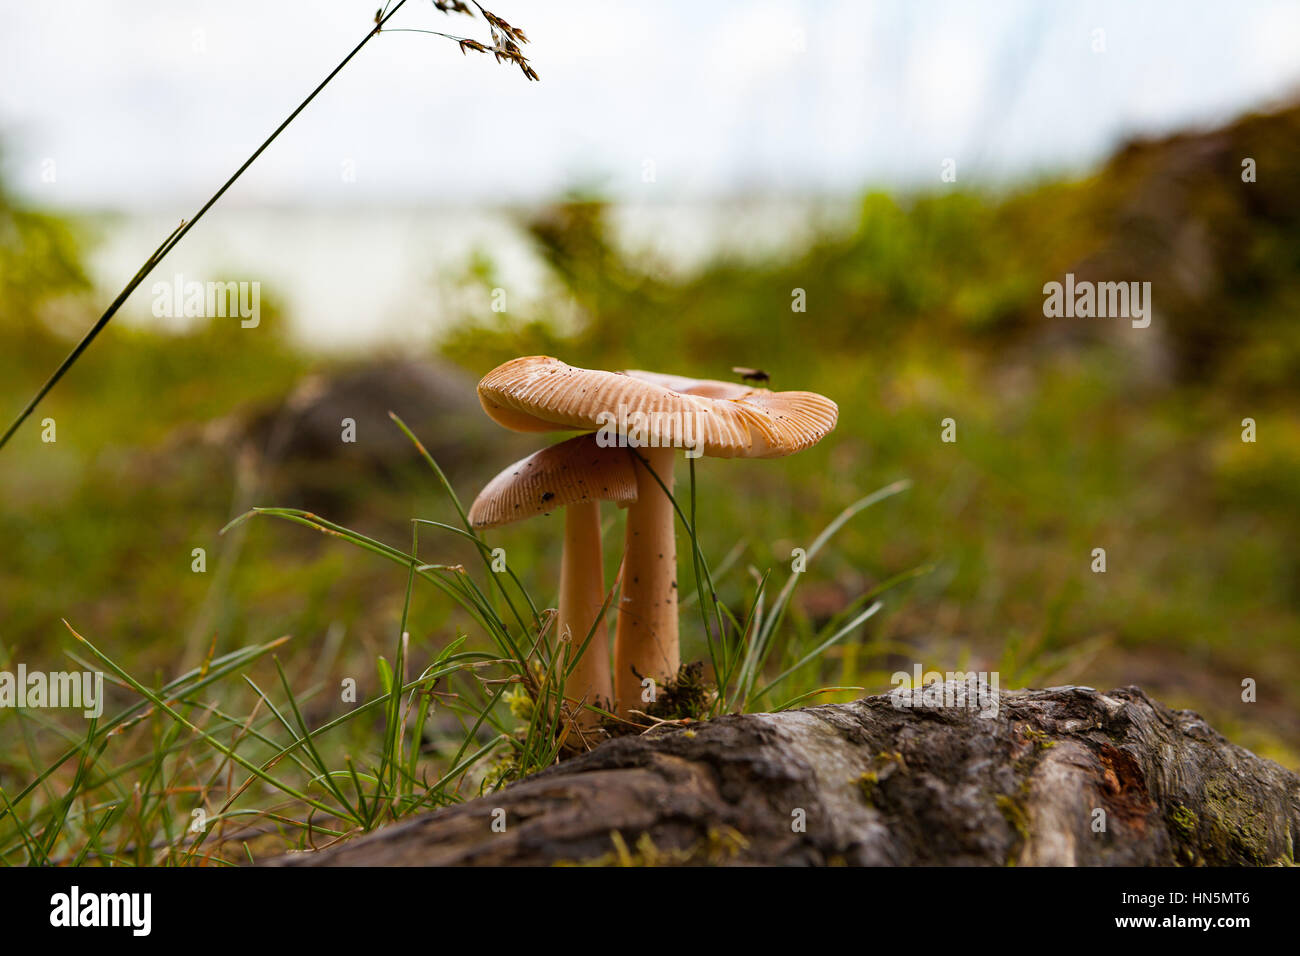 Mushrooms in forest near Baltic sea Stock Photo